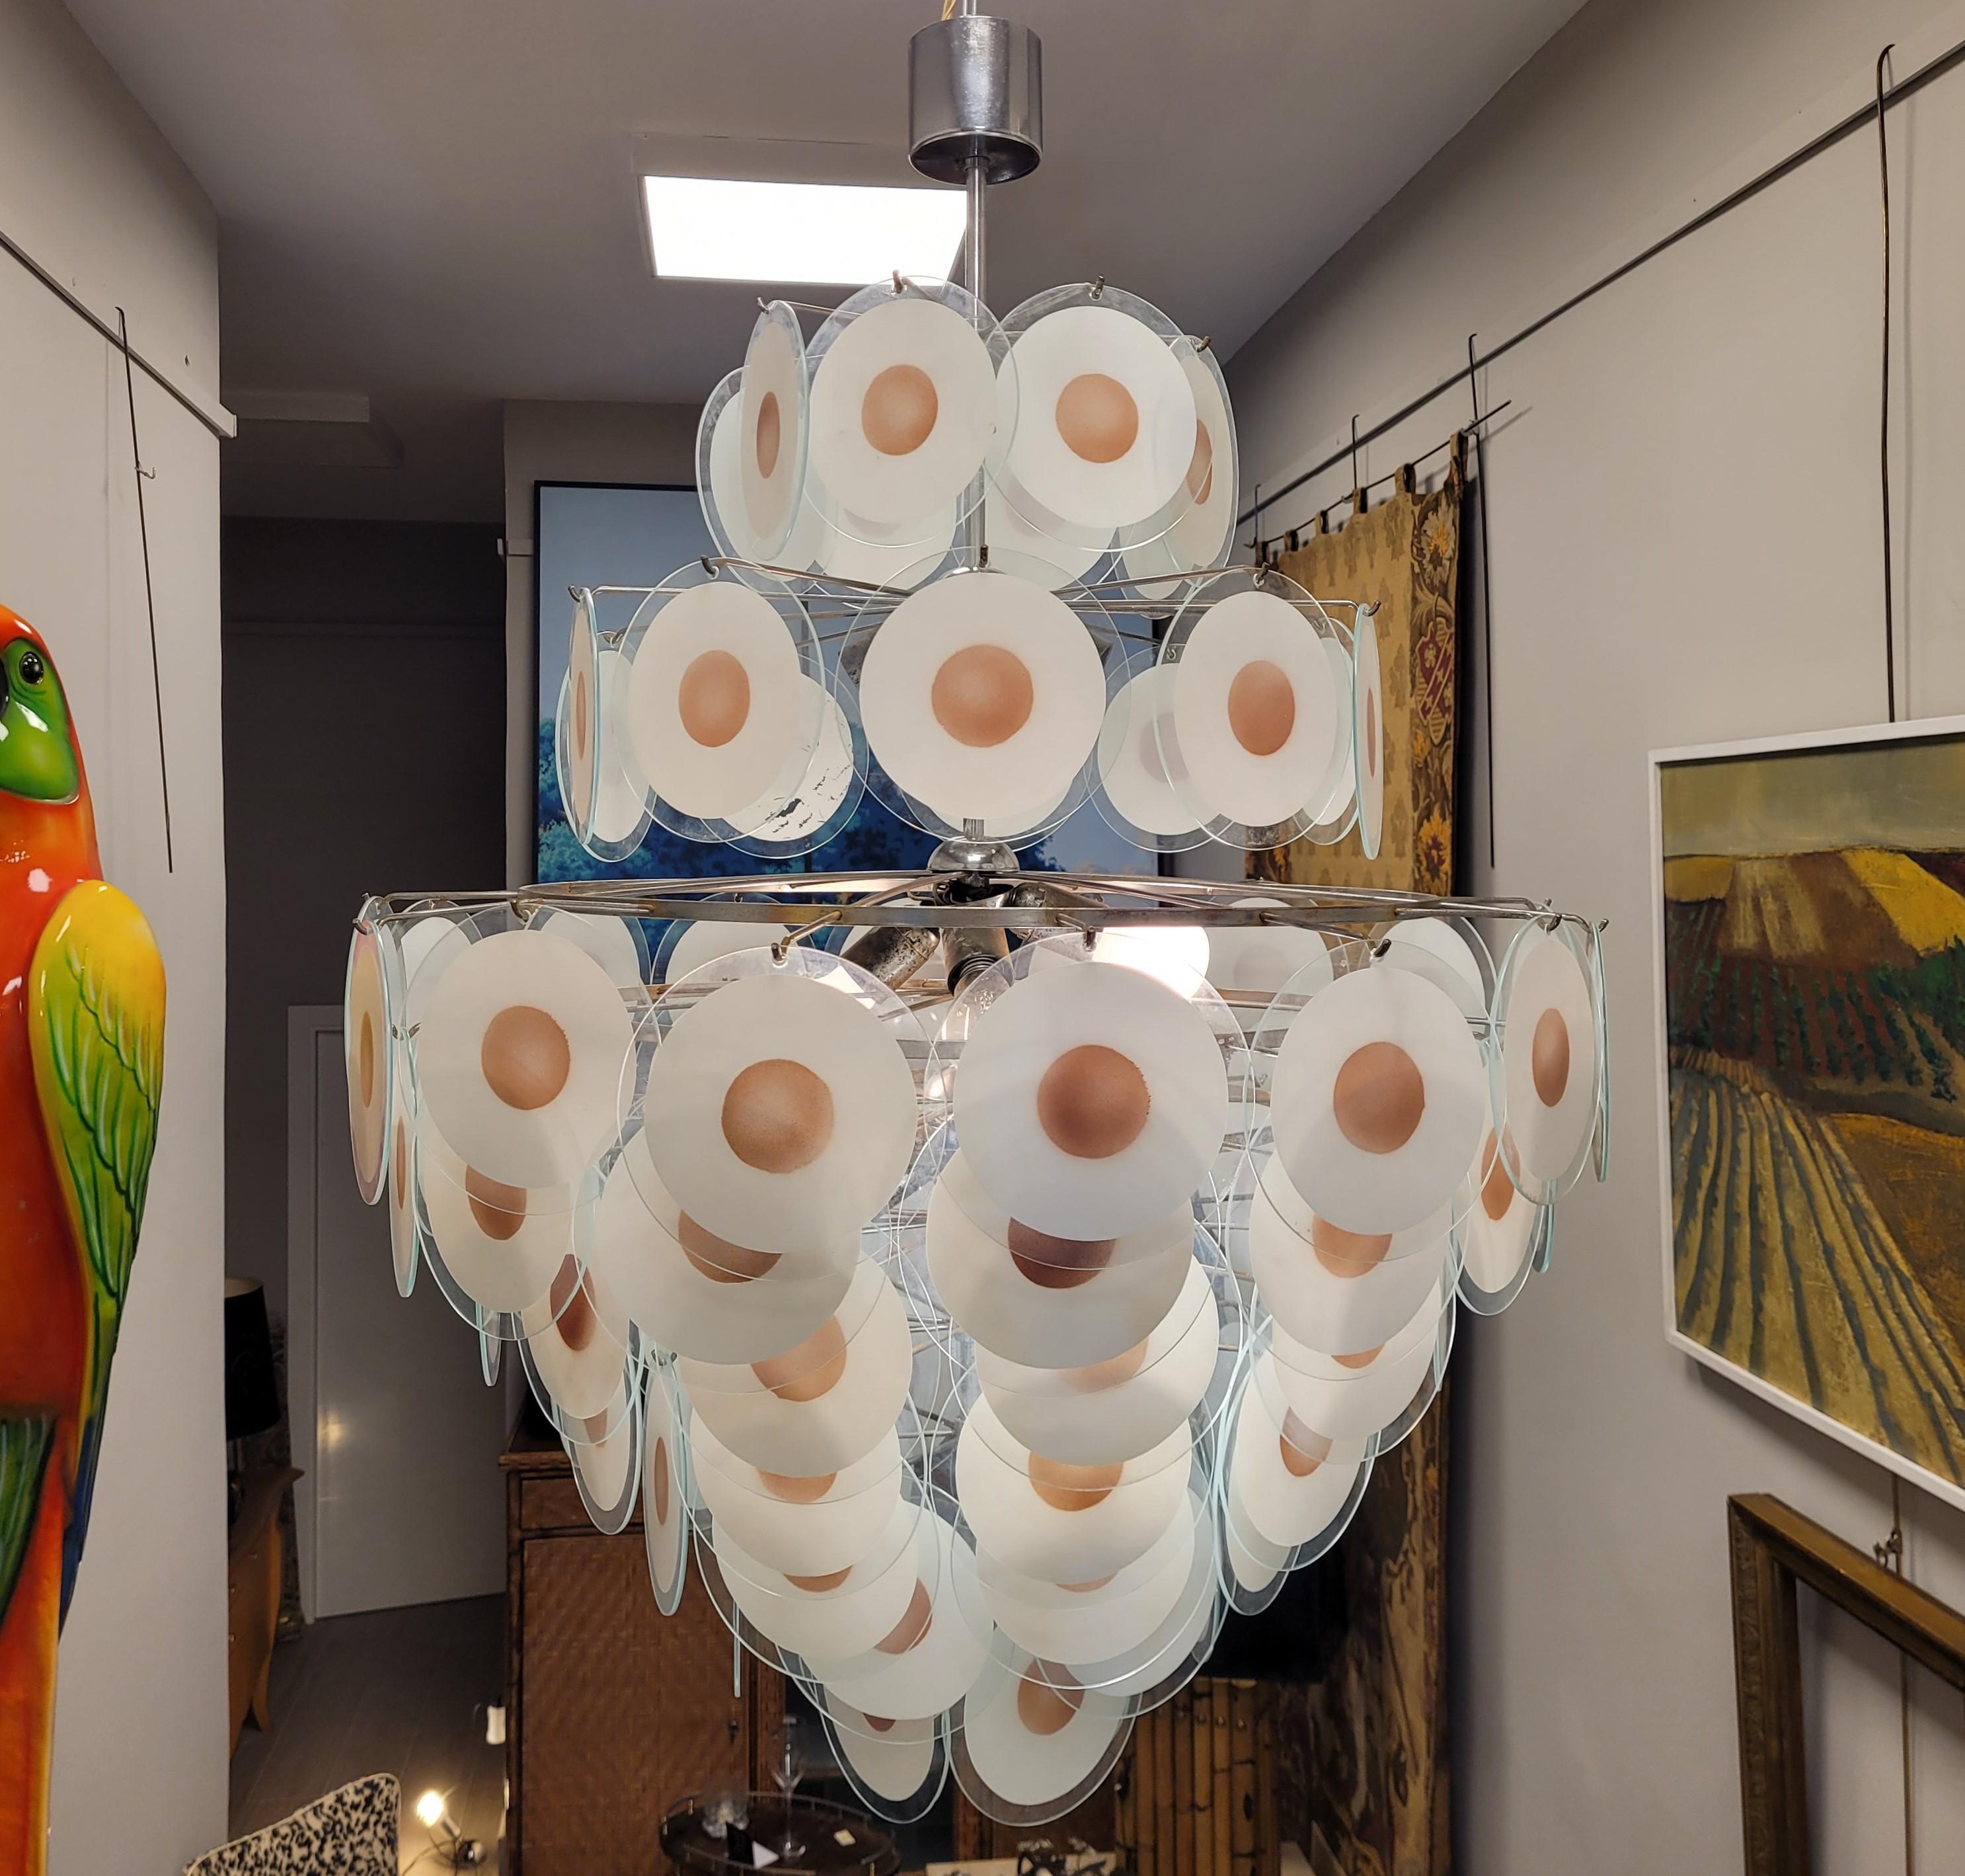 Amazing and Fantastic large chandelier-type lamp designed by Carlo Nason for the Venetian house Mazzega. It has a metal structure from which an infinity of white Murano glass discs hang with a salmon-colored circle, 26 cm in diameter. The Mazzega